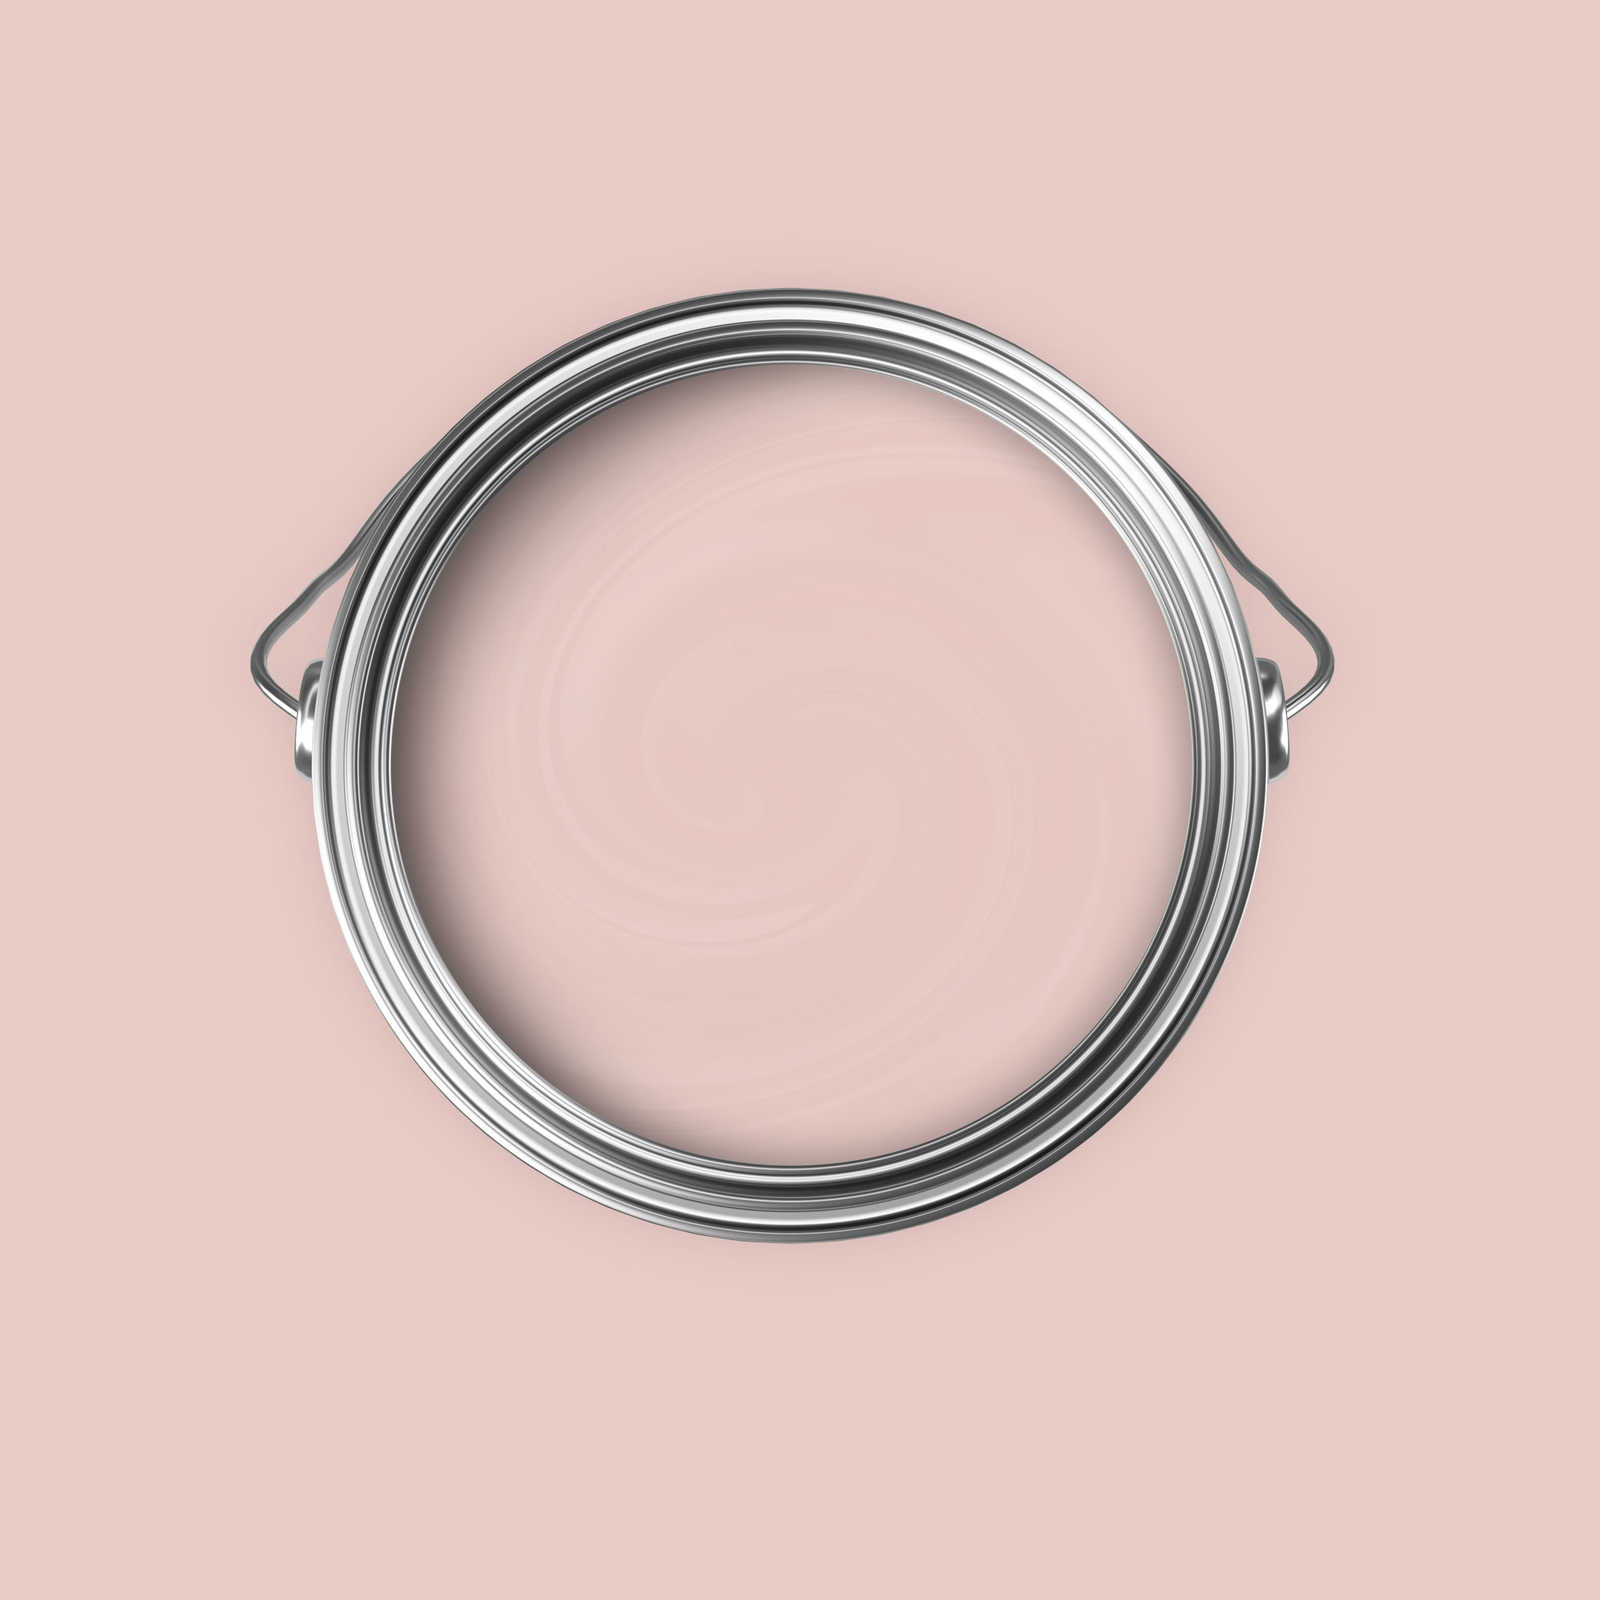             Premium Wall Paint Homely Old Pink »Luxury Lipstick« NW1001 – 5 litre
        